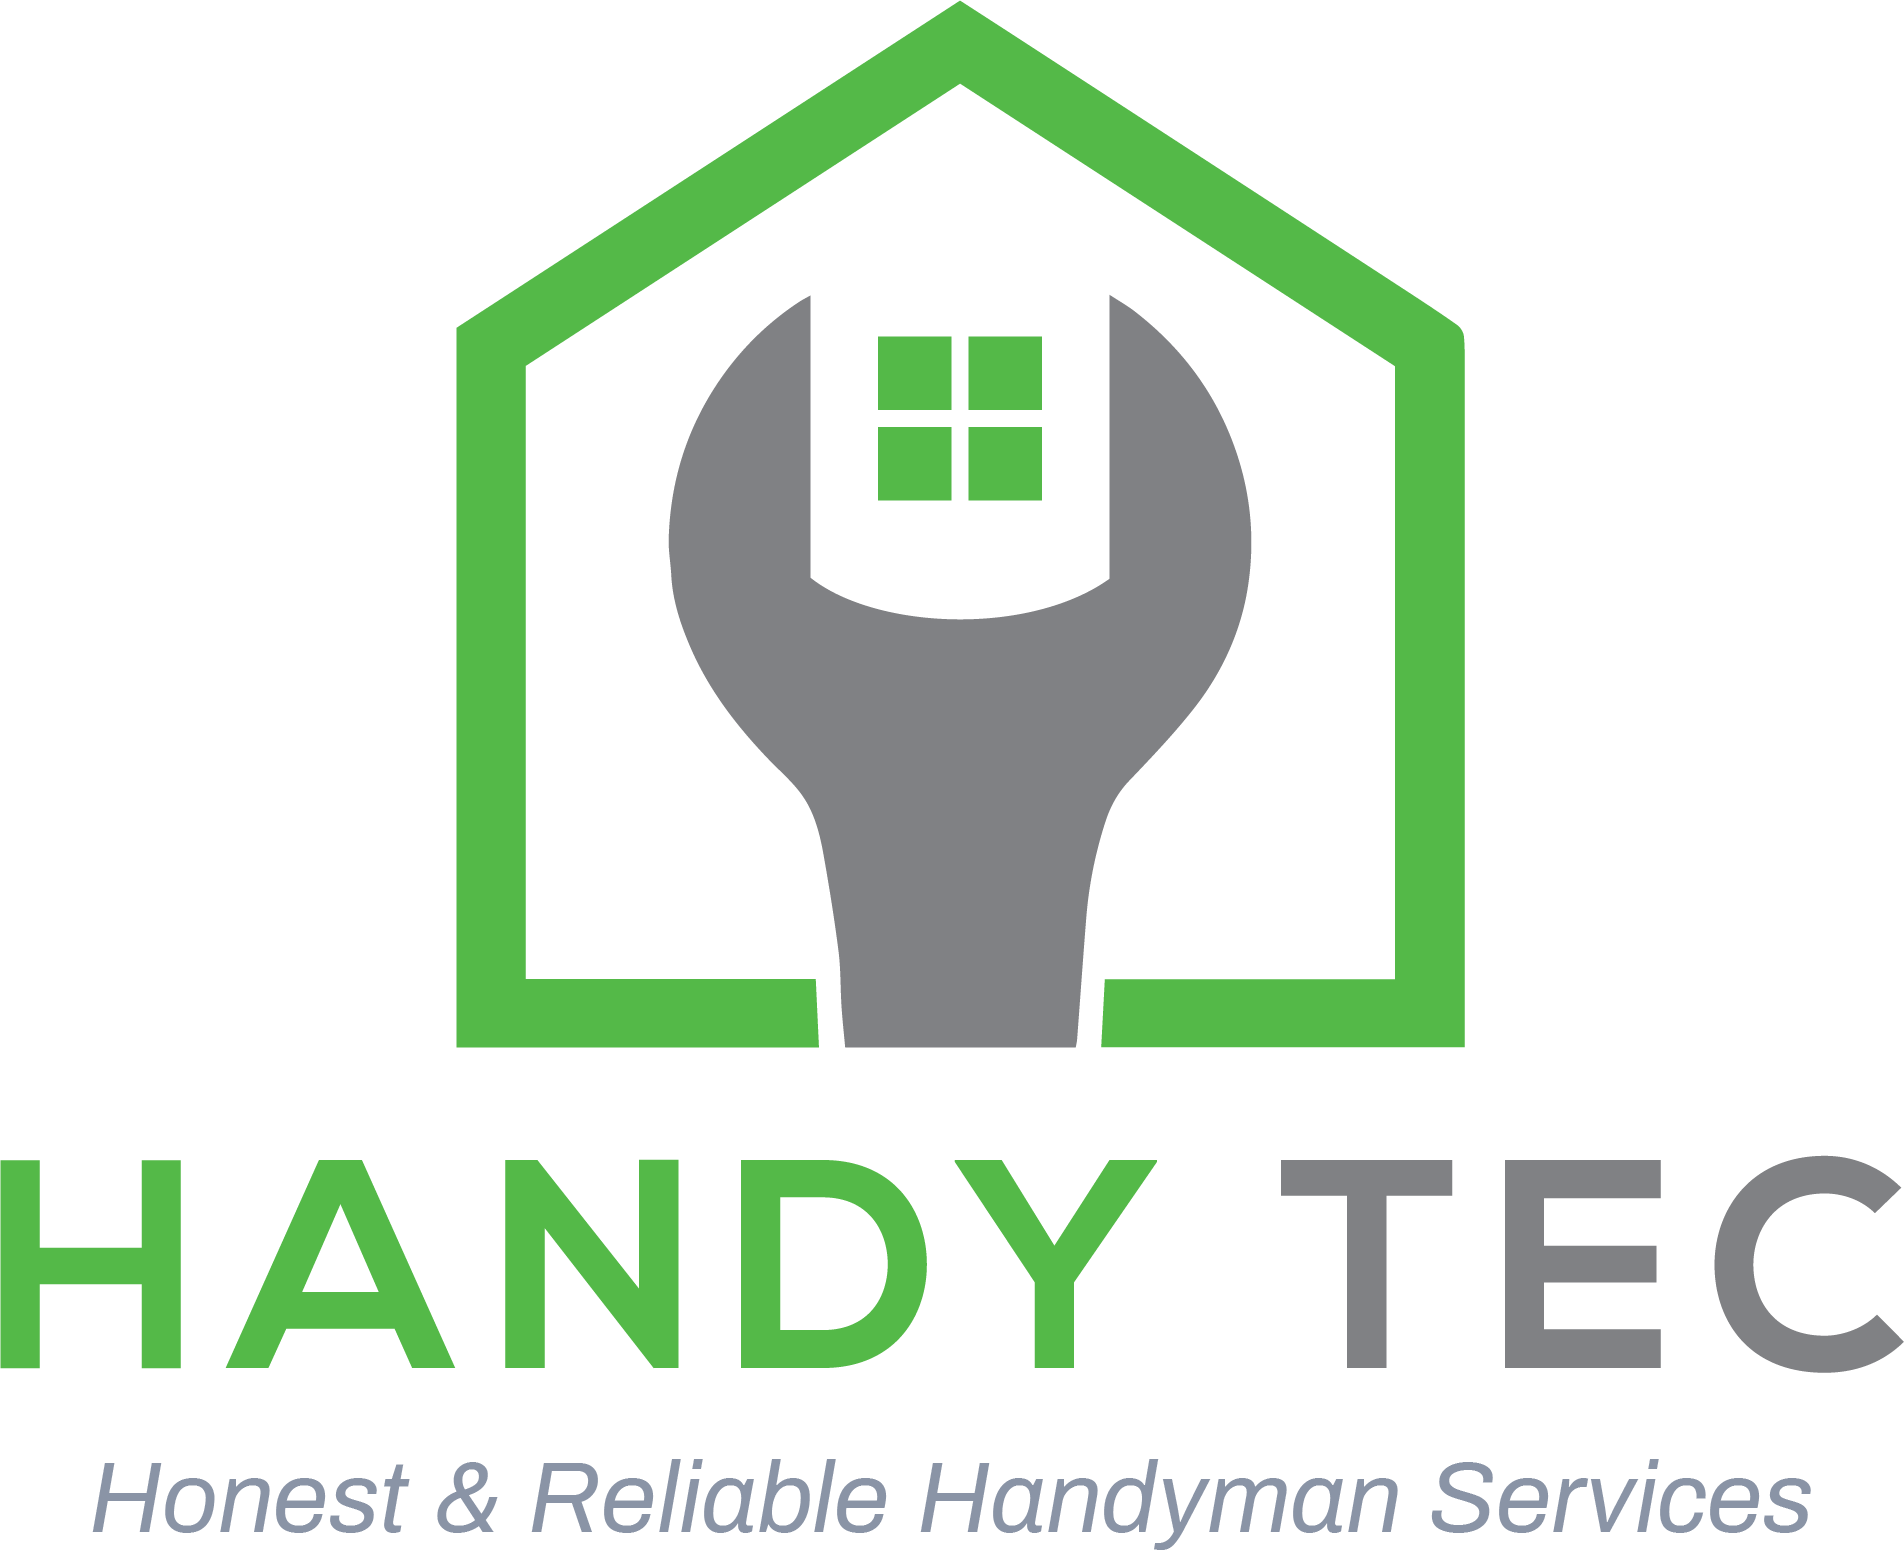 Honest & Reliable Handyman Services in South Jersey